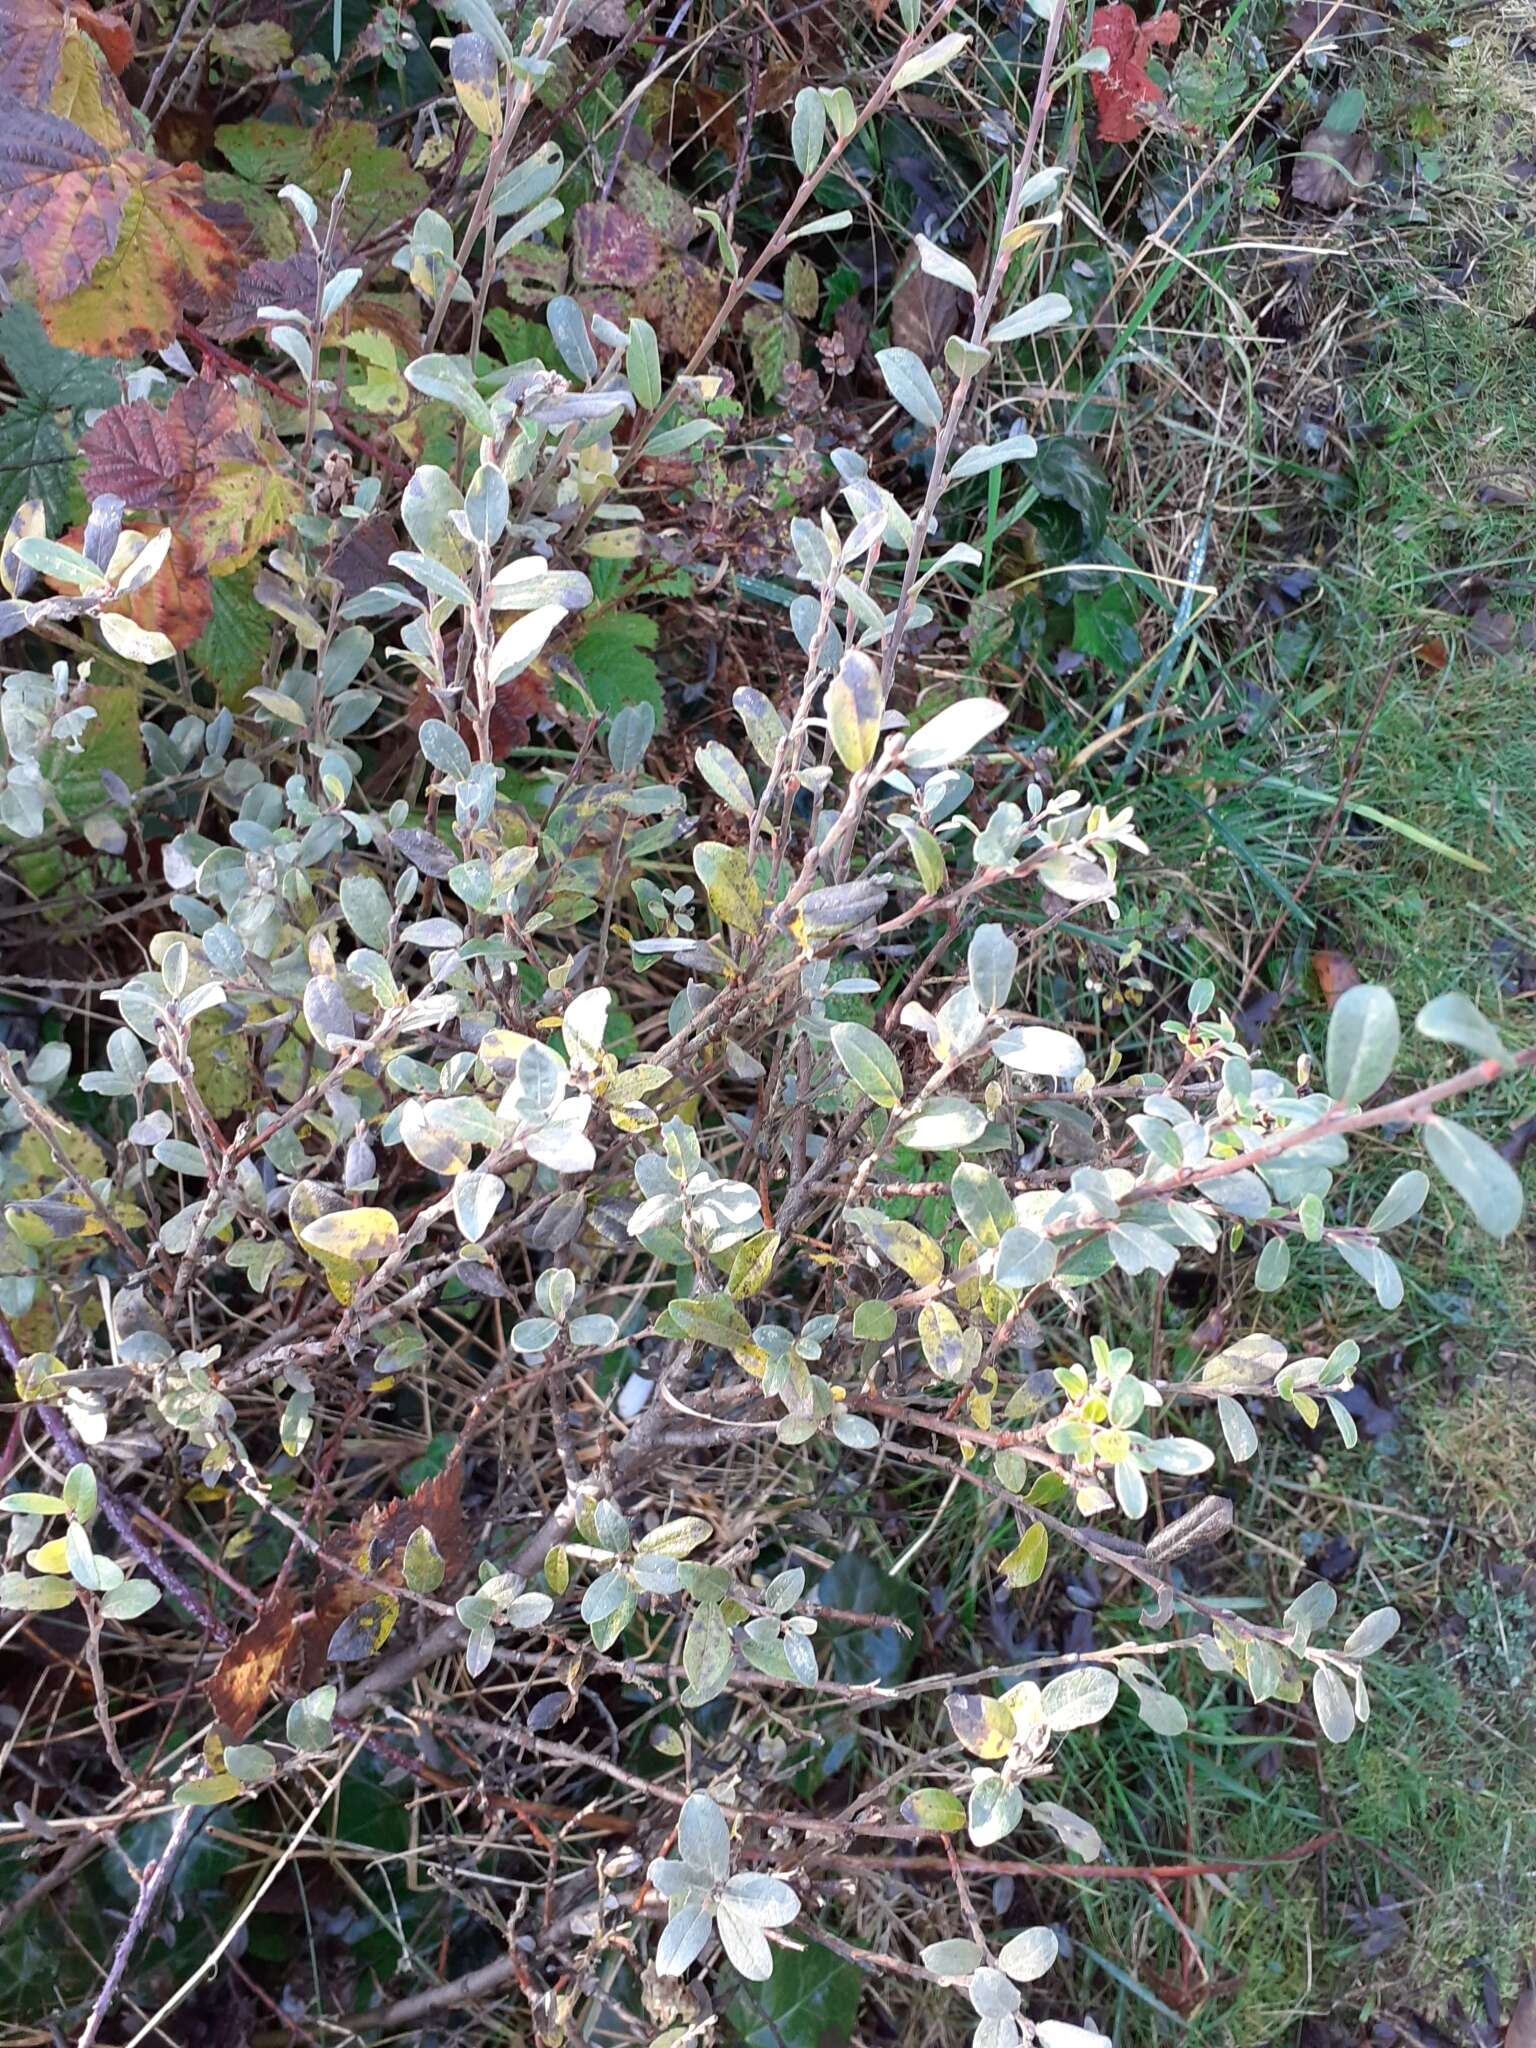 Image of creeping willow